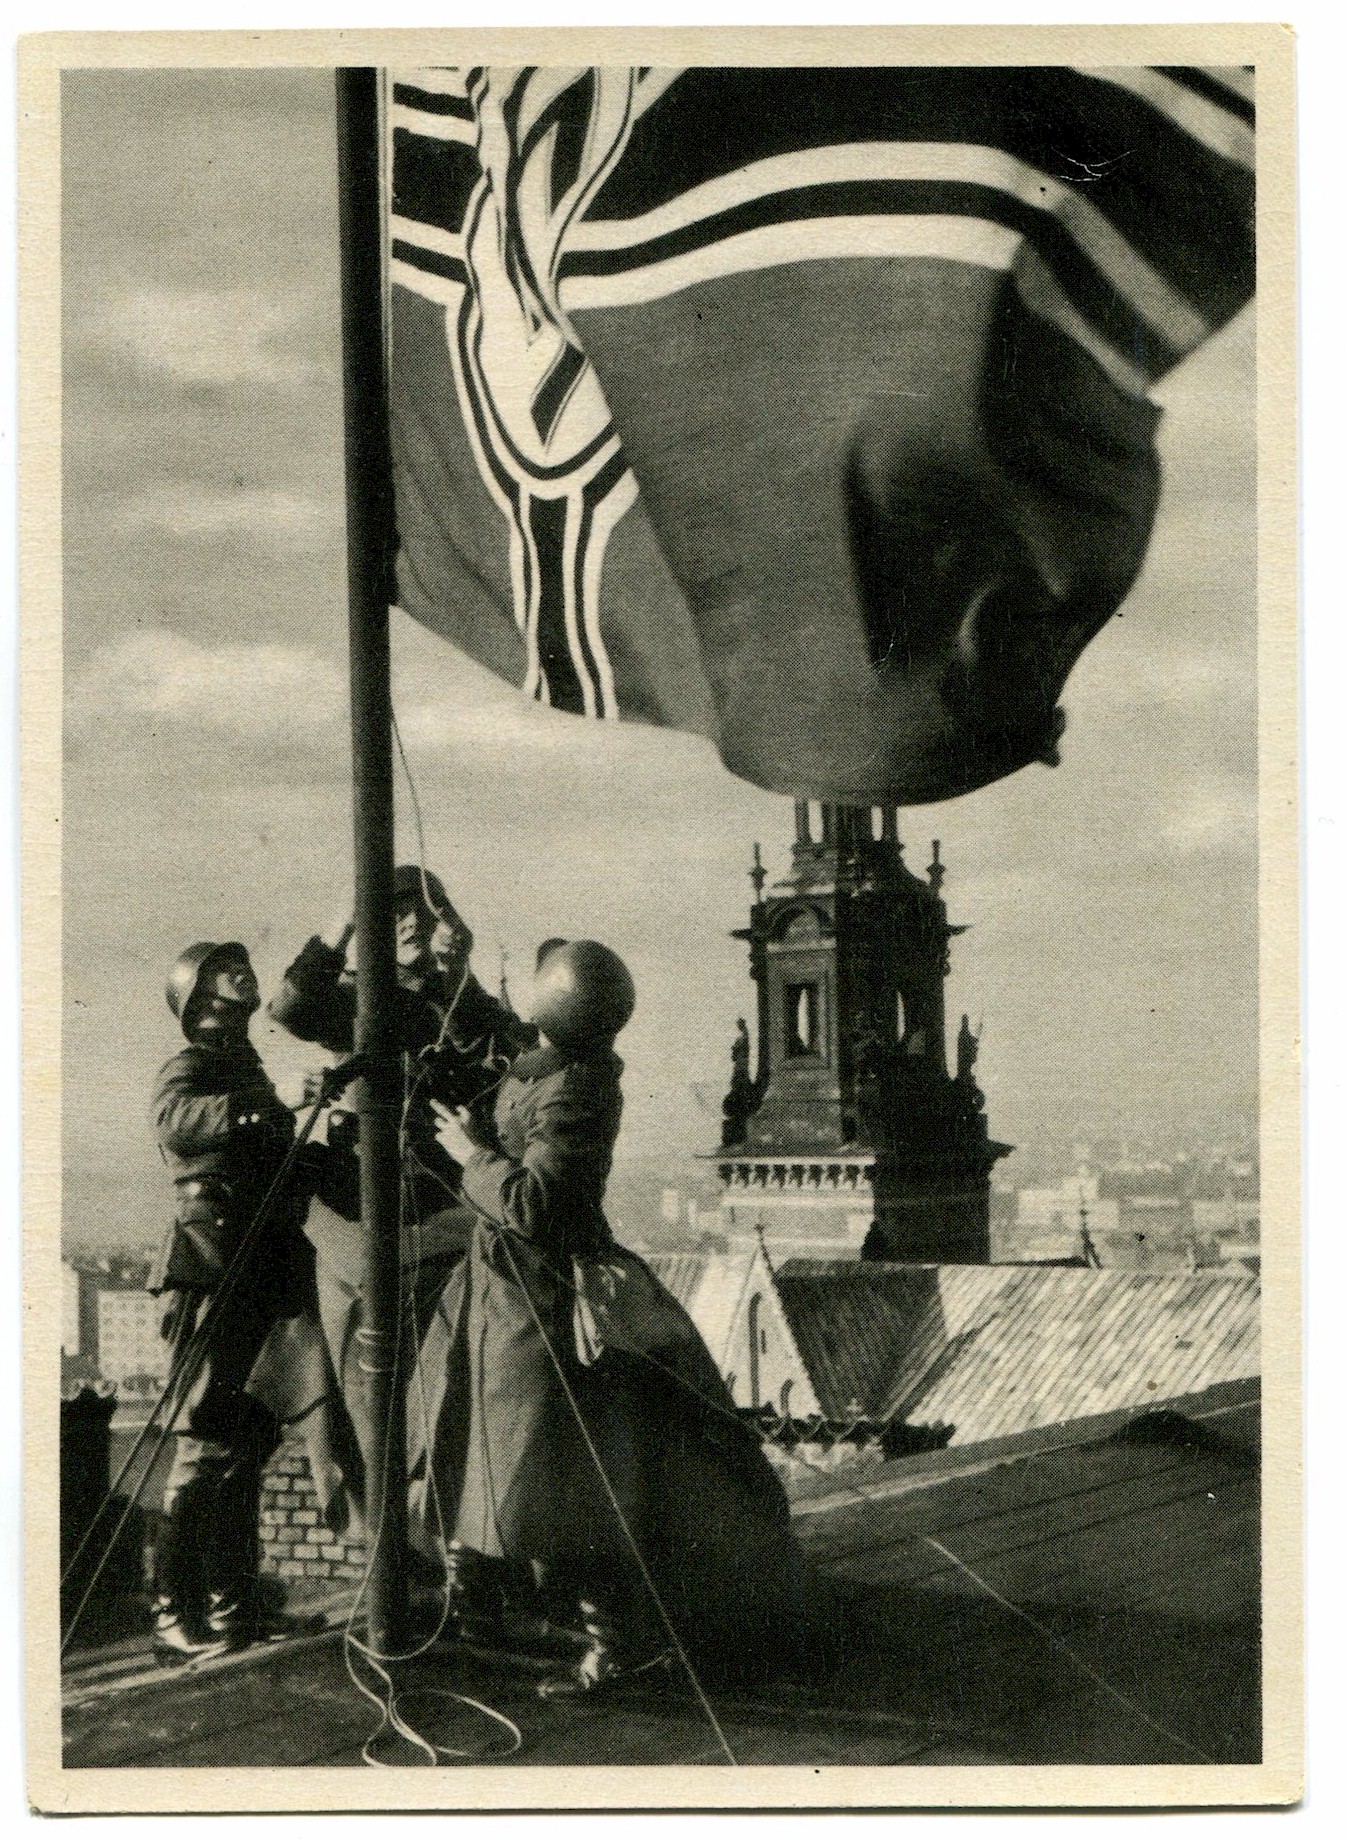 SS POST CARD POLICE IN POLAND"GERMAN POLICE HOIST THE REICHS SERVICE FLAG OVER THE CASTLE IN KRAKAU"